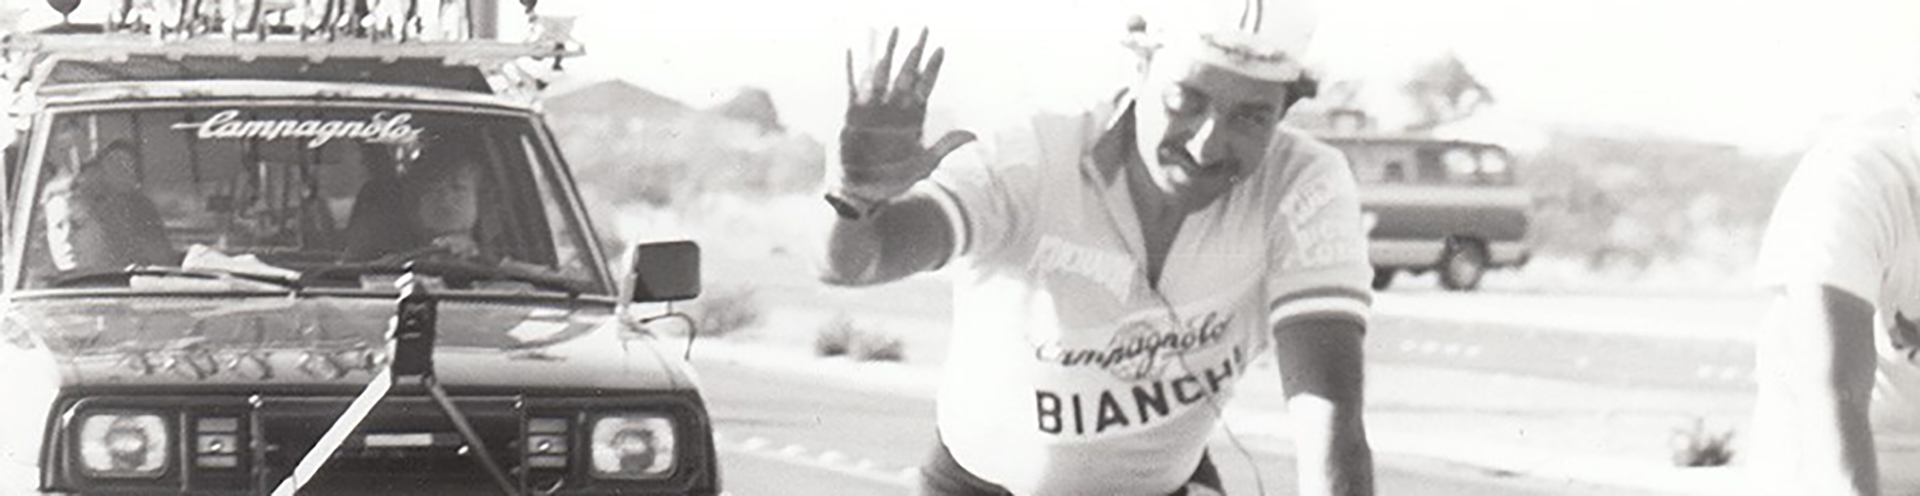 Michael Coles during his transcontinental cycling journey